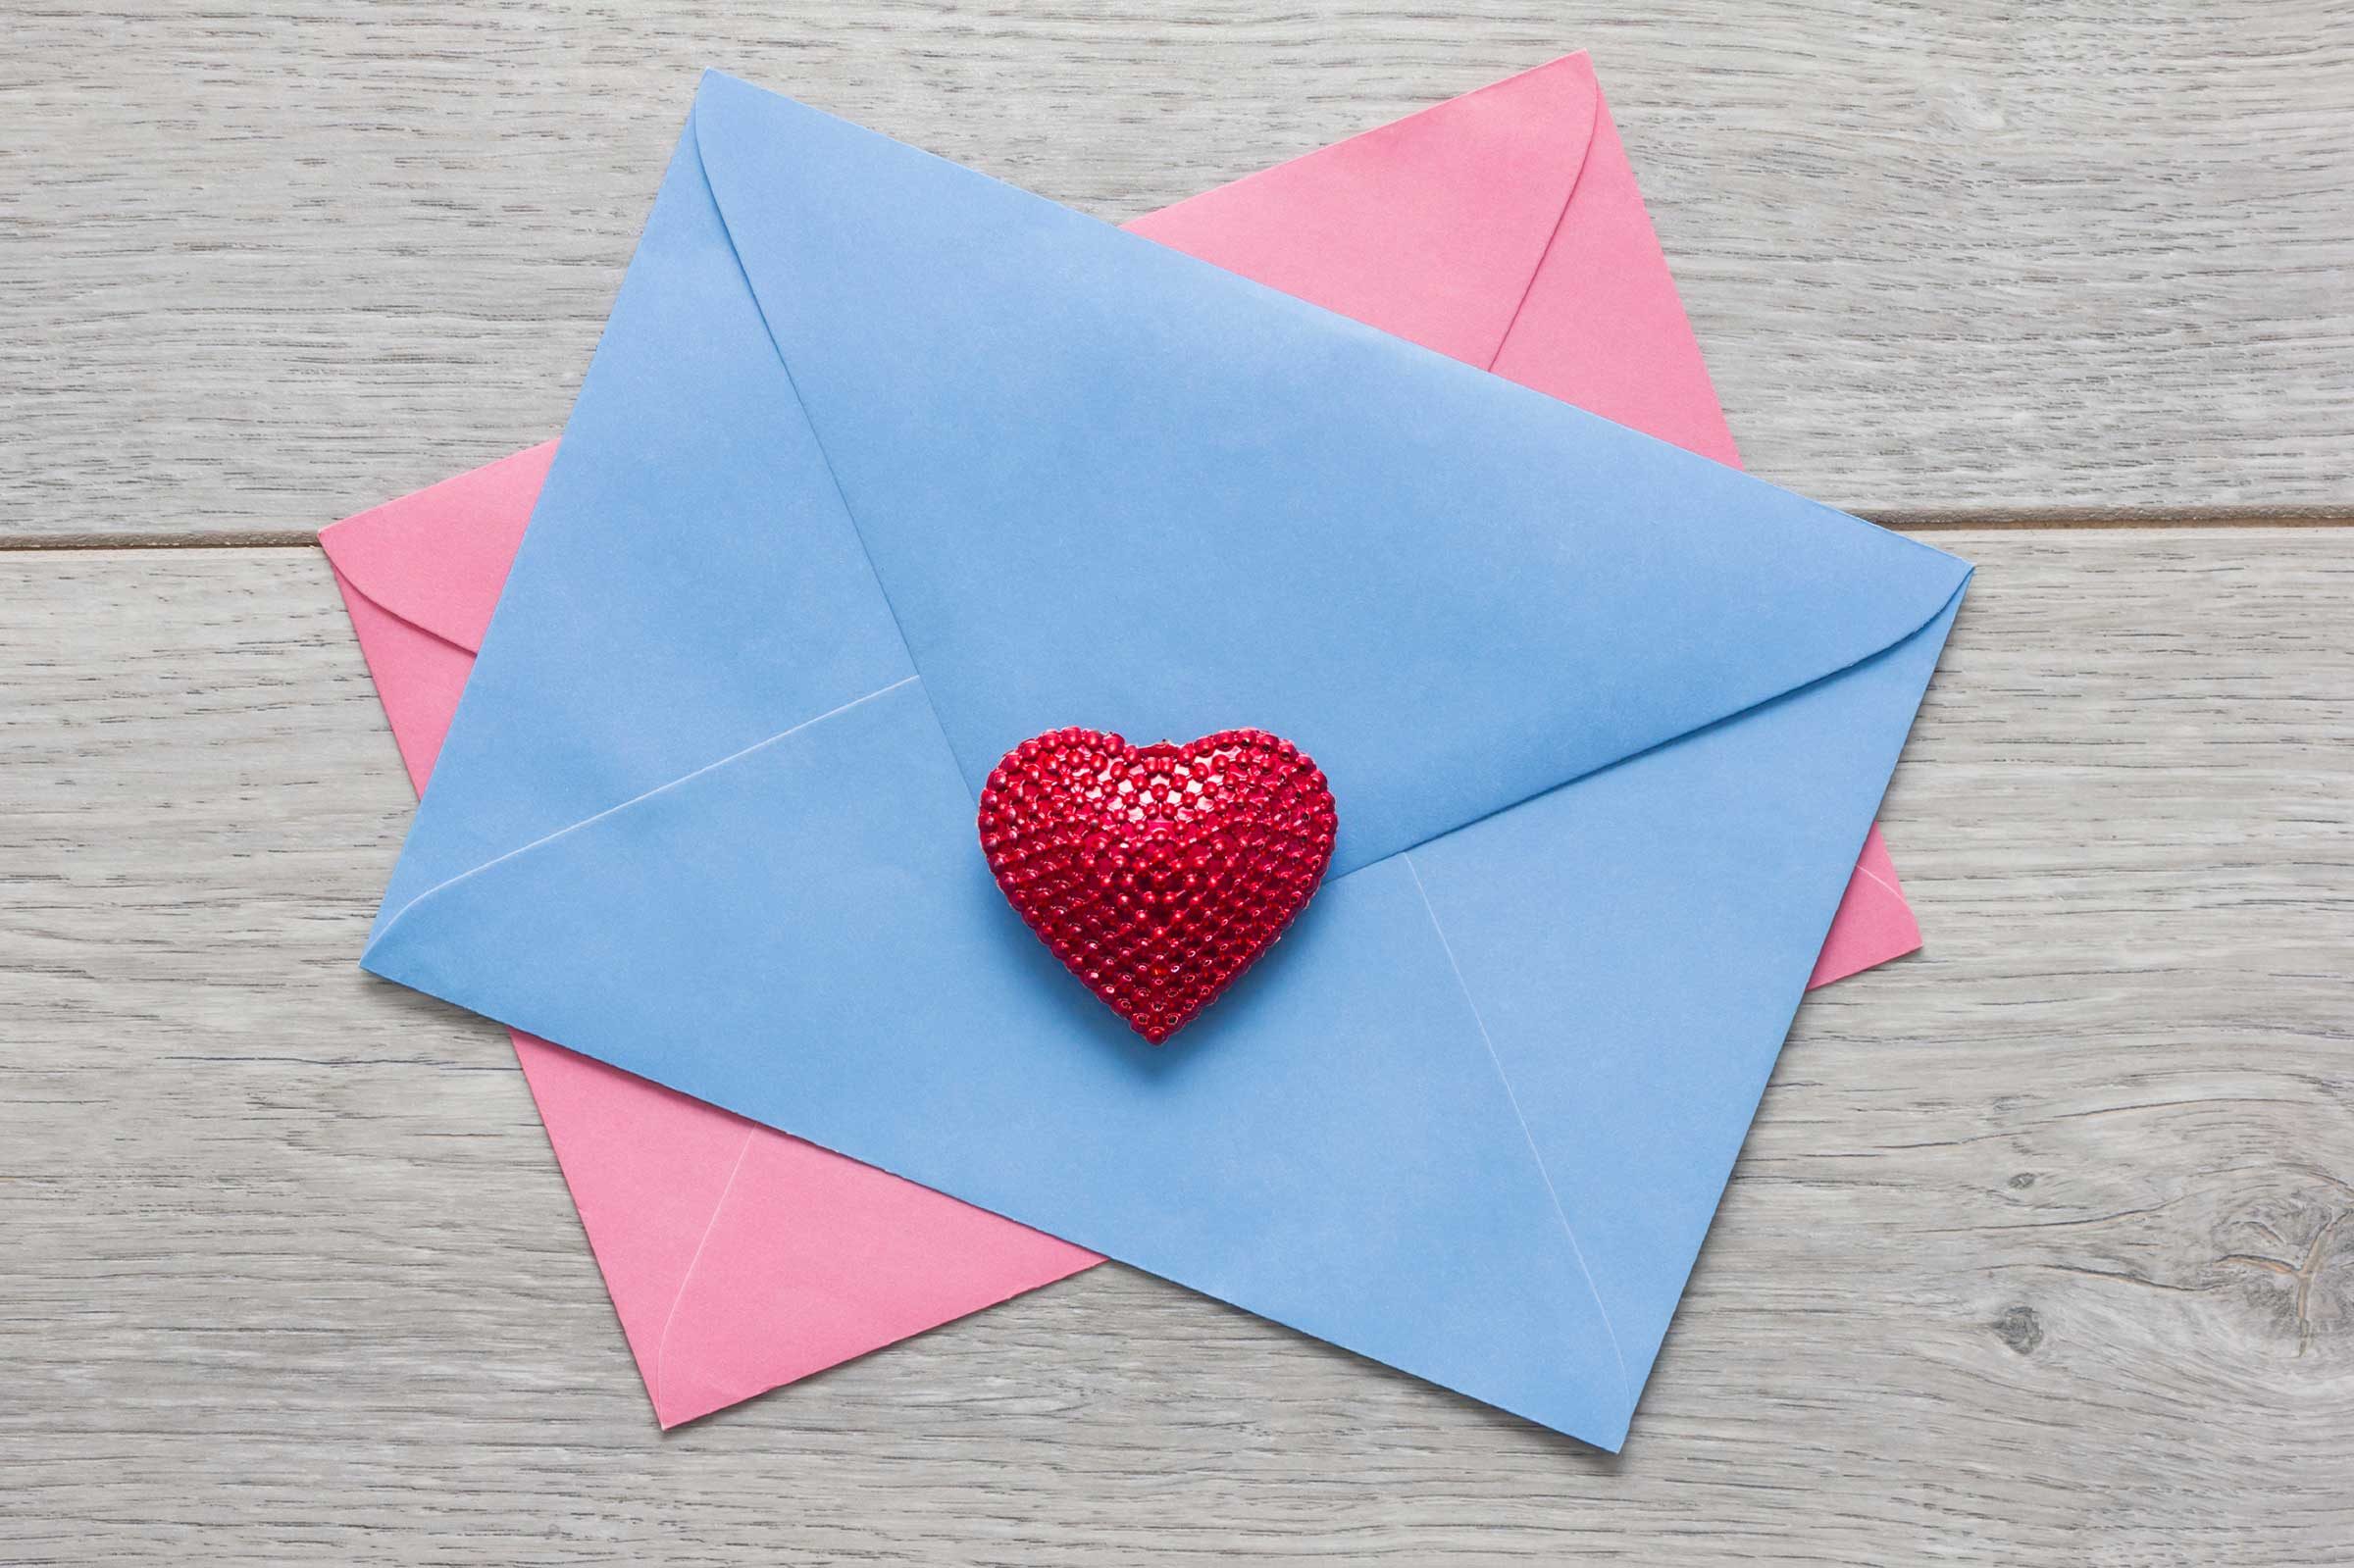 13 Things Your Card Store Won't Tell You on Valentine's Day | Reader's Digest